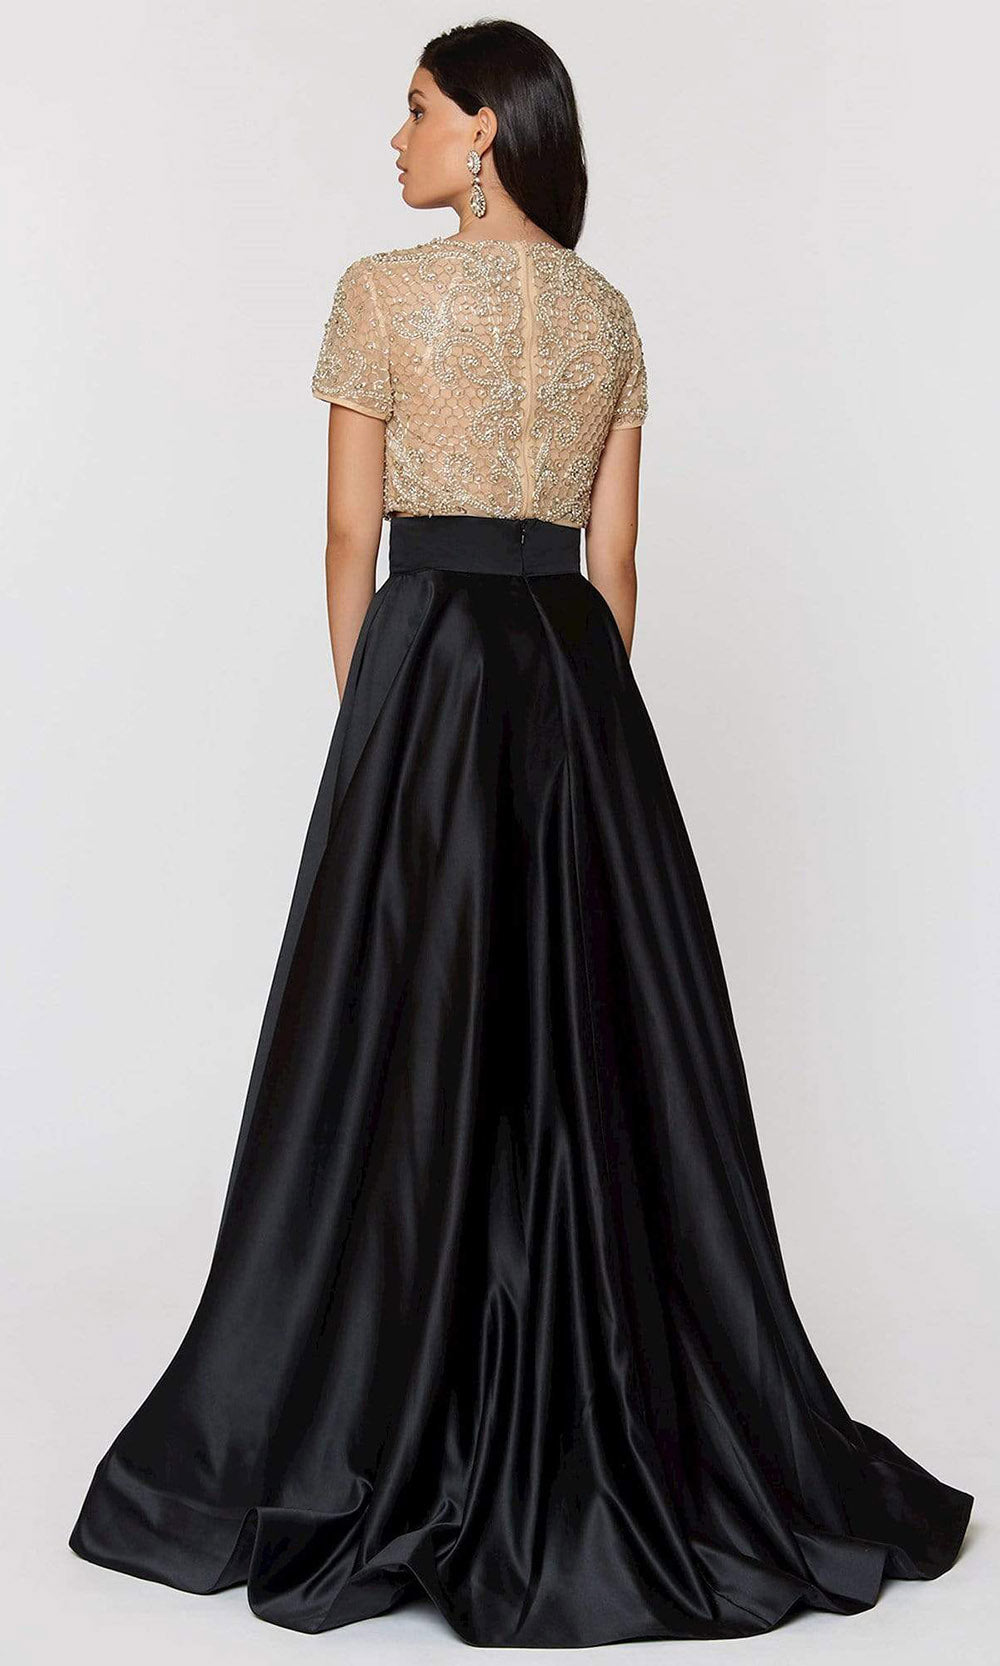 Ashley Lauren - 1251SC Crystal Embellished Illusion Top Two-Piece Gown In Black and Neutral